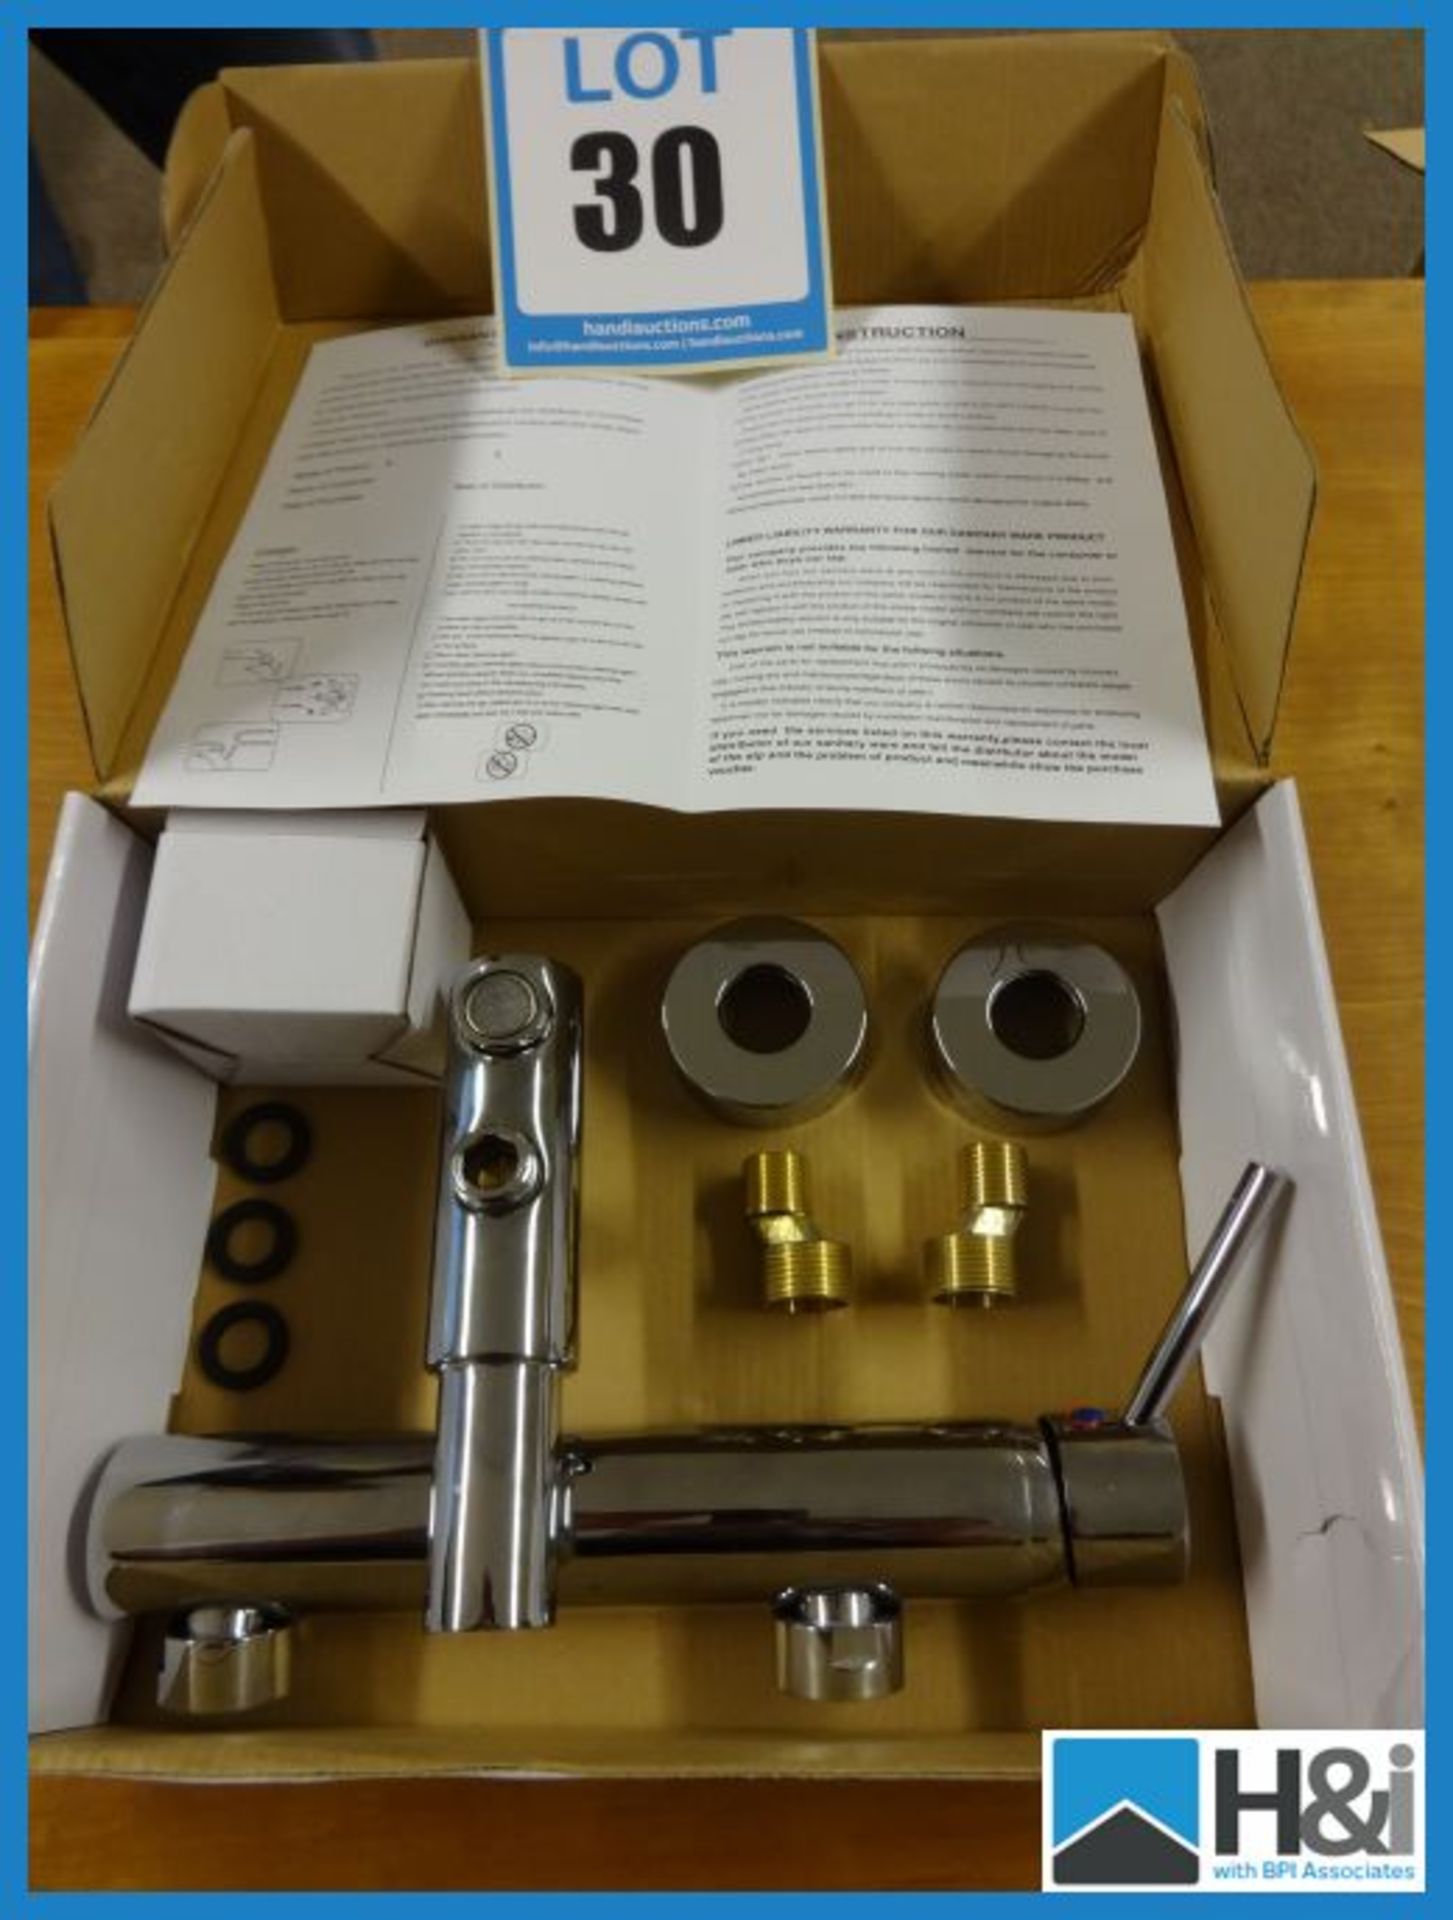 New boxed wall mounted bath filler mixer tap with fixings and facility for shower hose to be